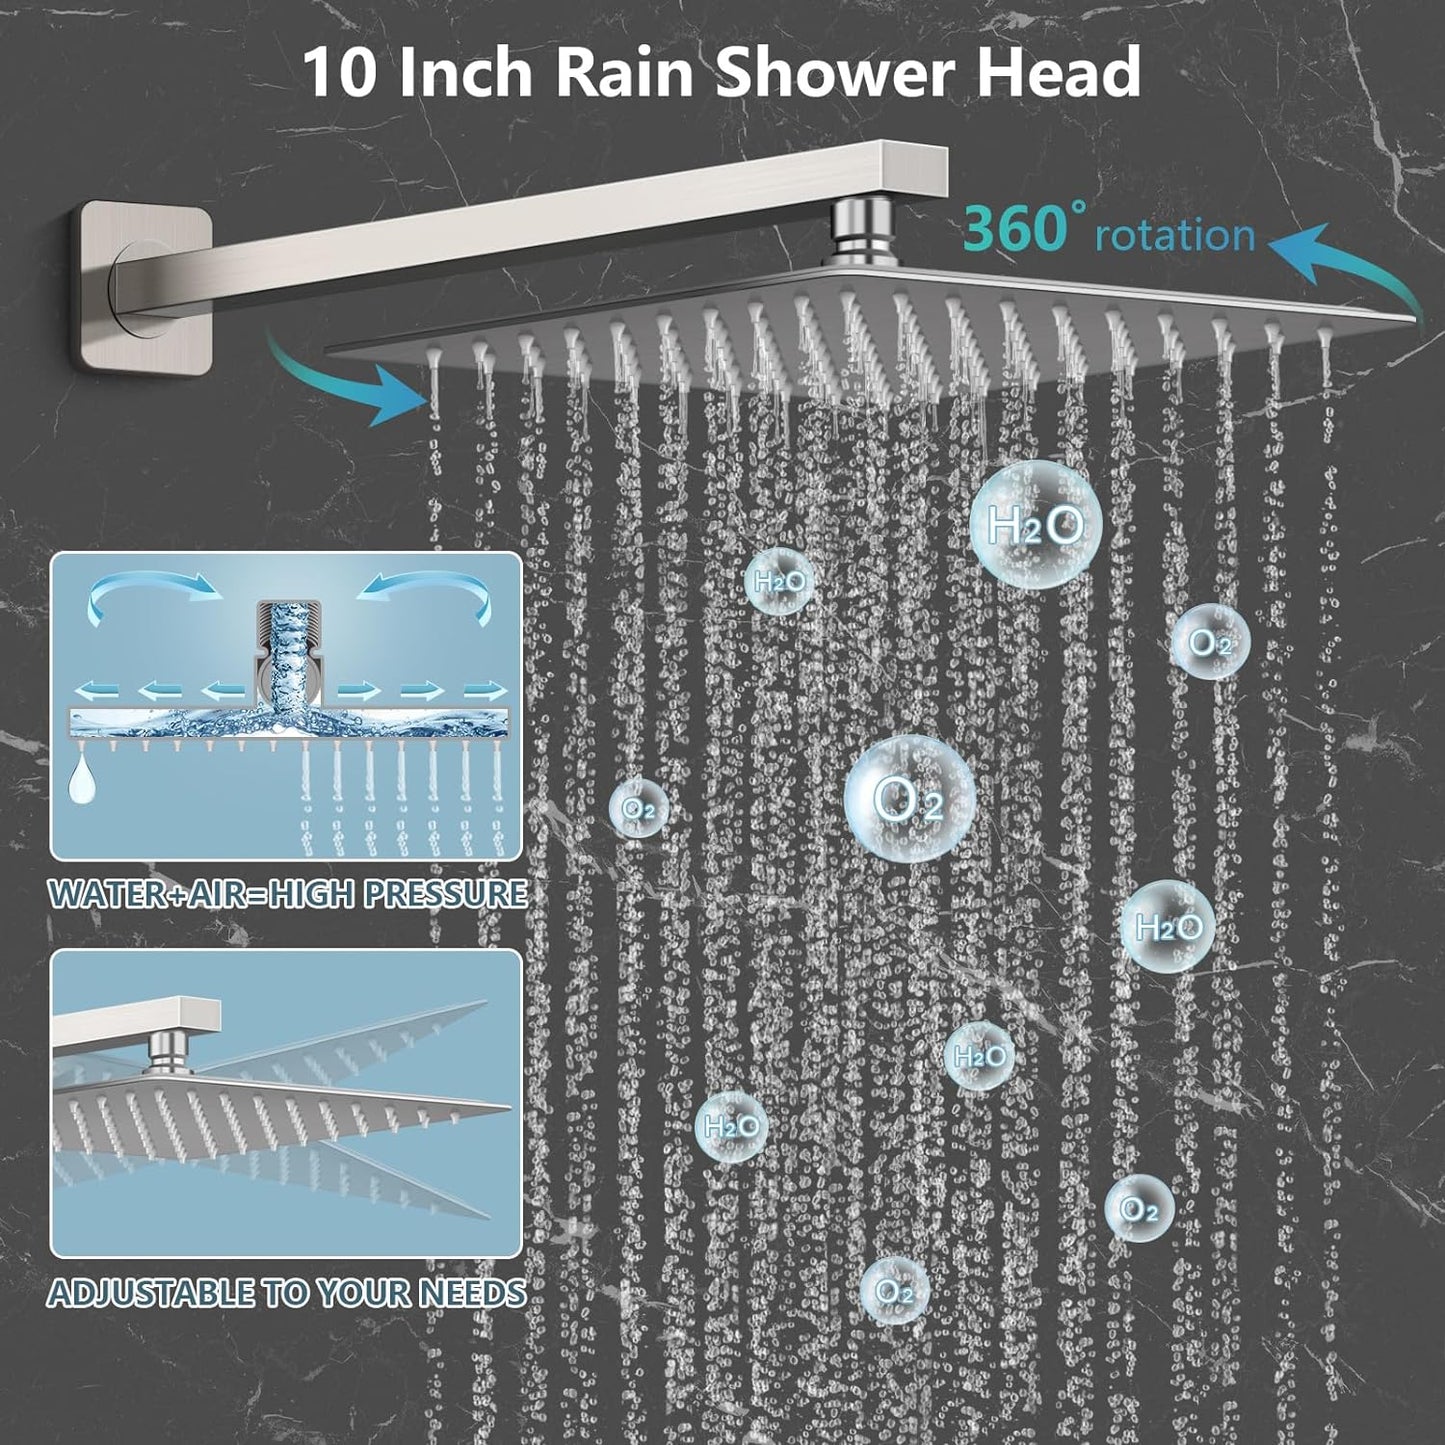 Baetuy 10 Inch Shower Faucet Set, Rainfall Shower System with High Pressure Handheld Shower Head and Square Fixed Shower Head,Spray Wall Mounted Rainfall Shower Fixtures (Brushed Nickel, 10'-Mo